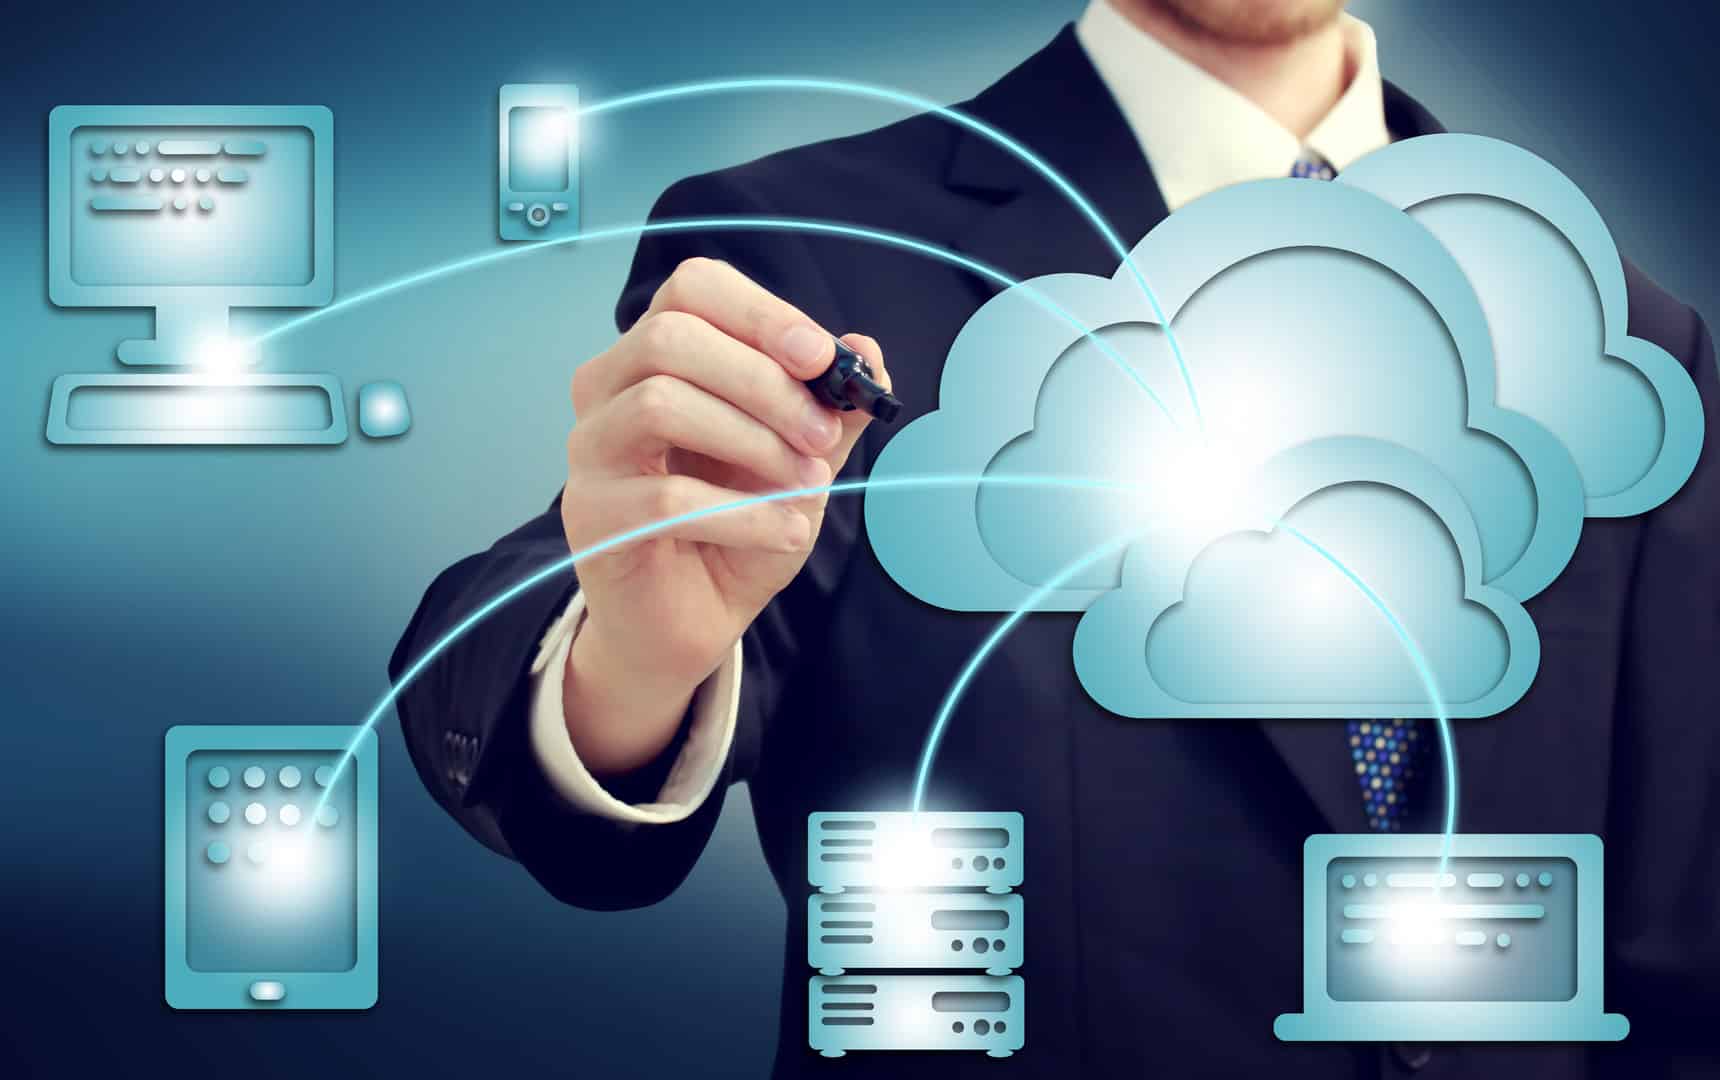 What Do You Look for in a Cloud Service Provider?